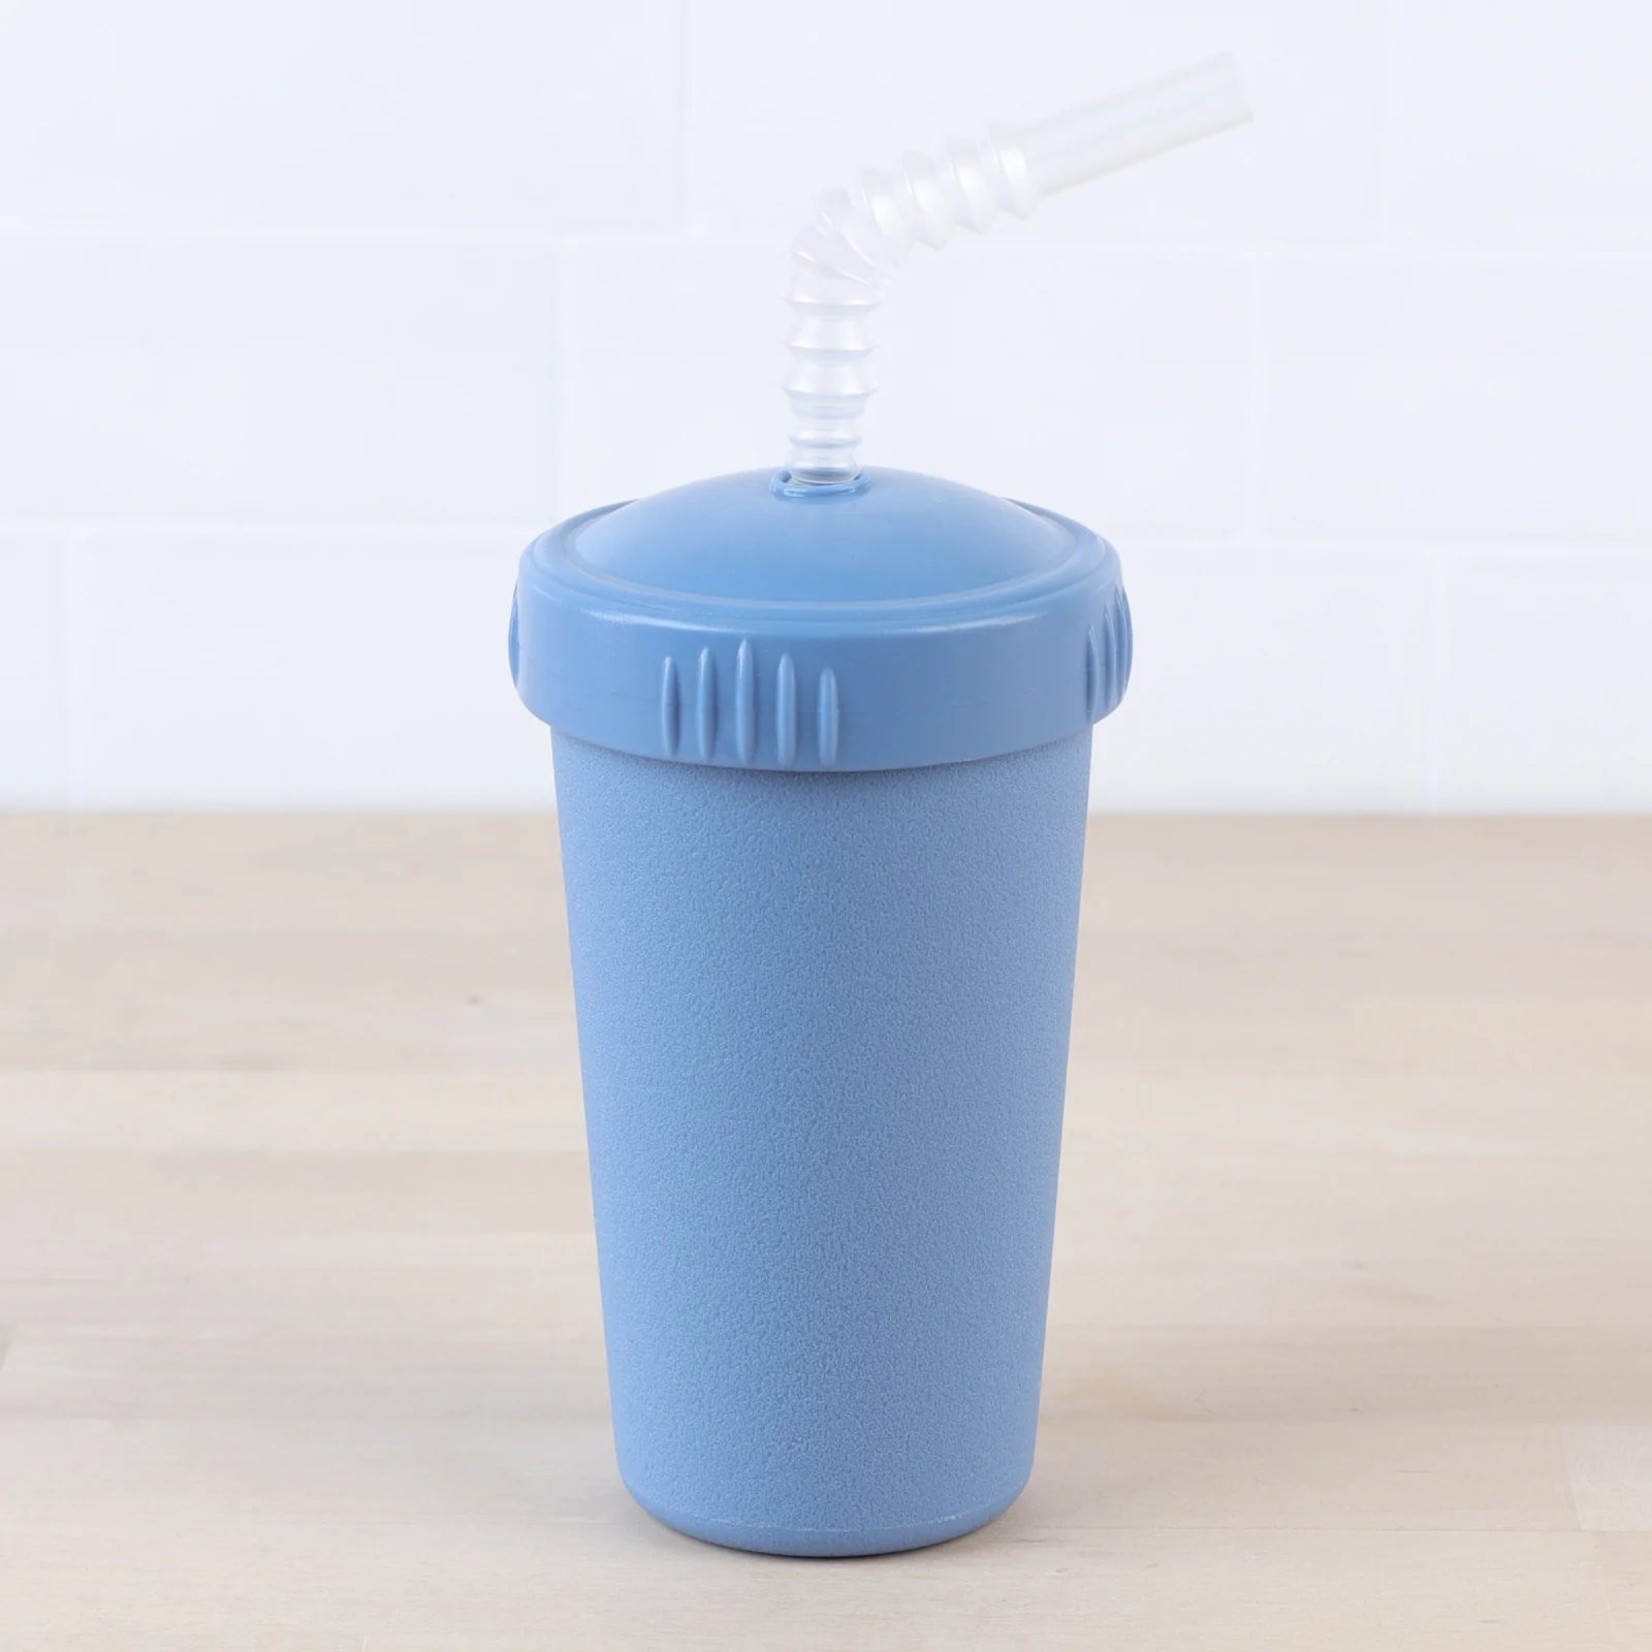 REPLAY REPLAY STRAW CUP WITH LID & BENDY STRAW